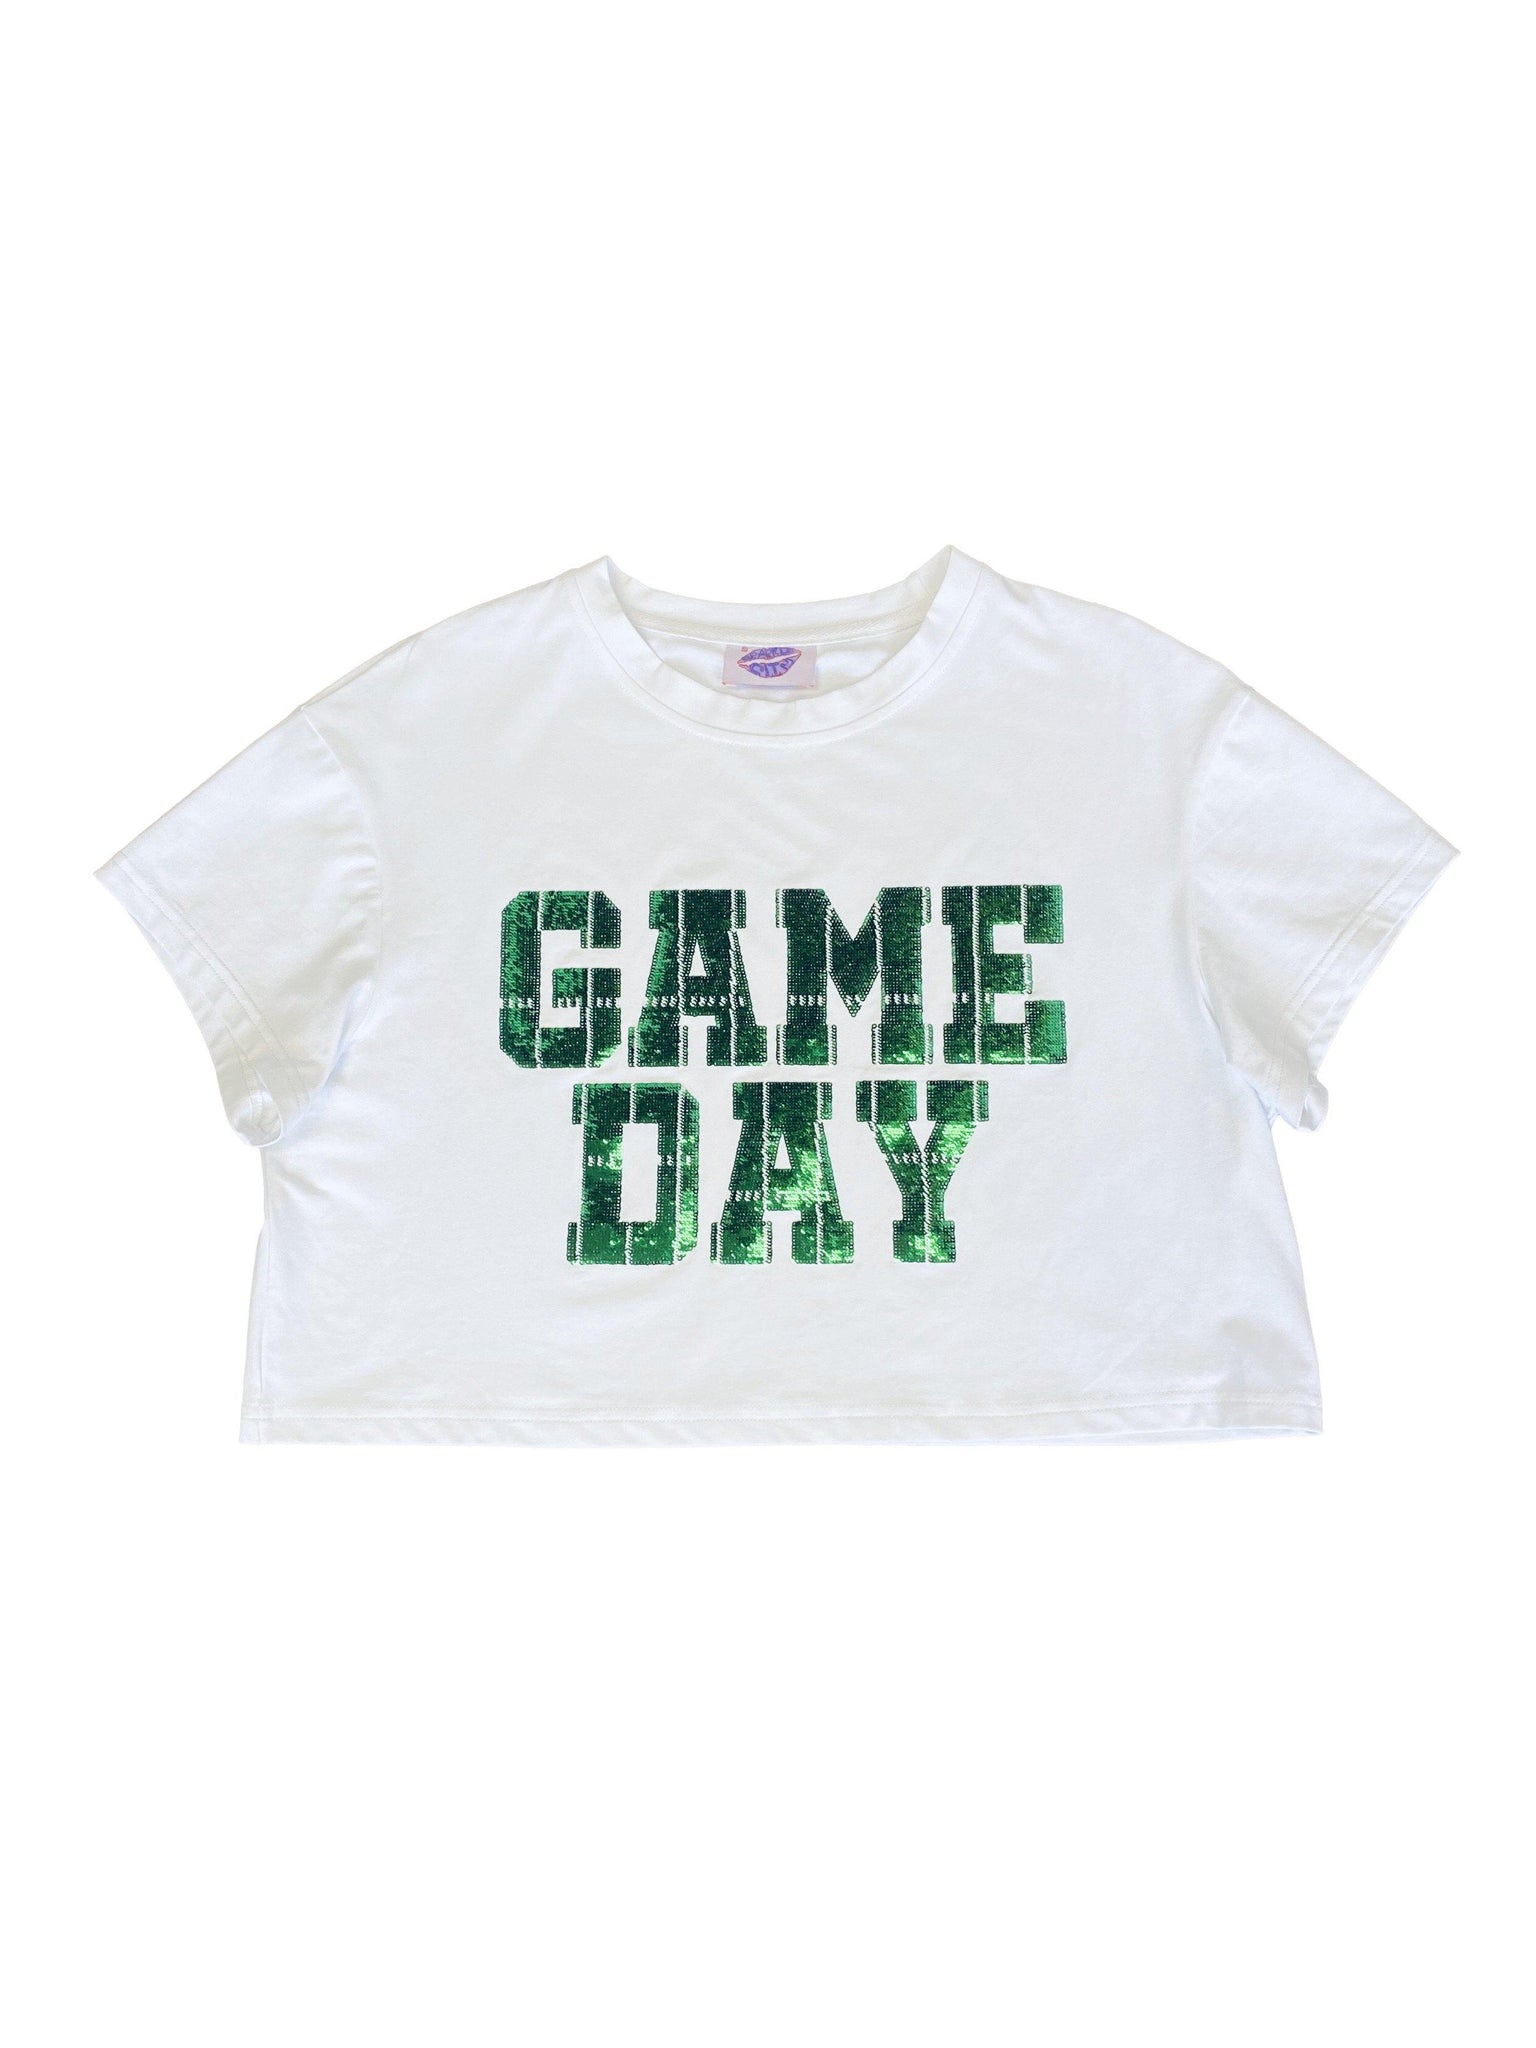 Game Day Crop Tee Shirt and Regular Fit Tee